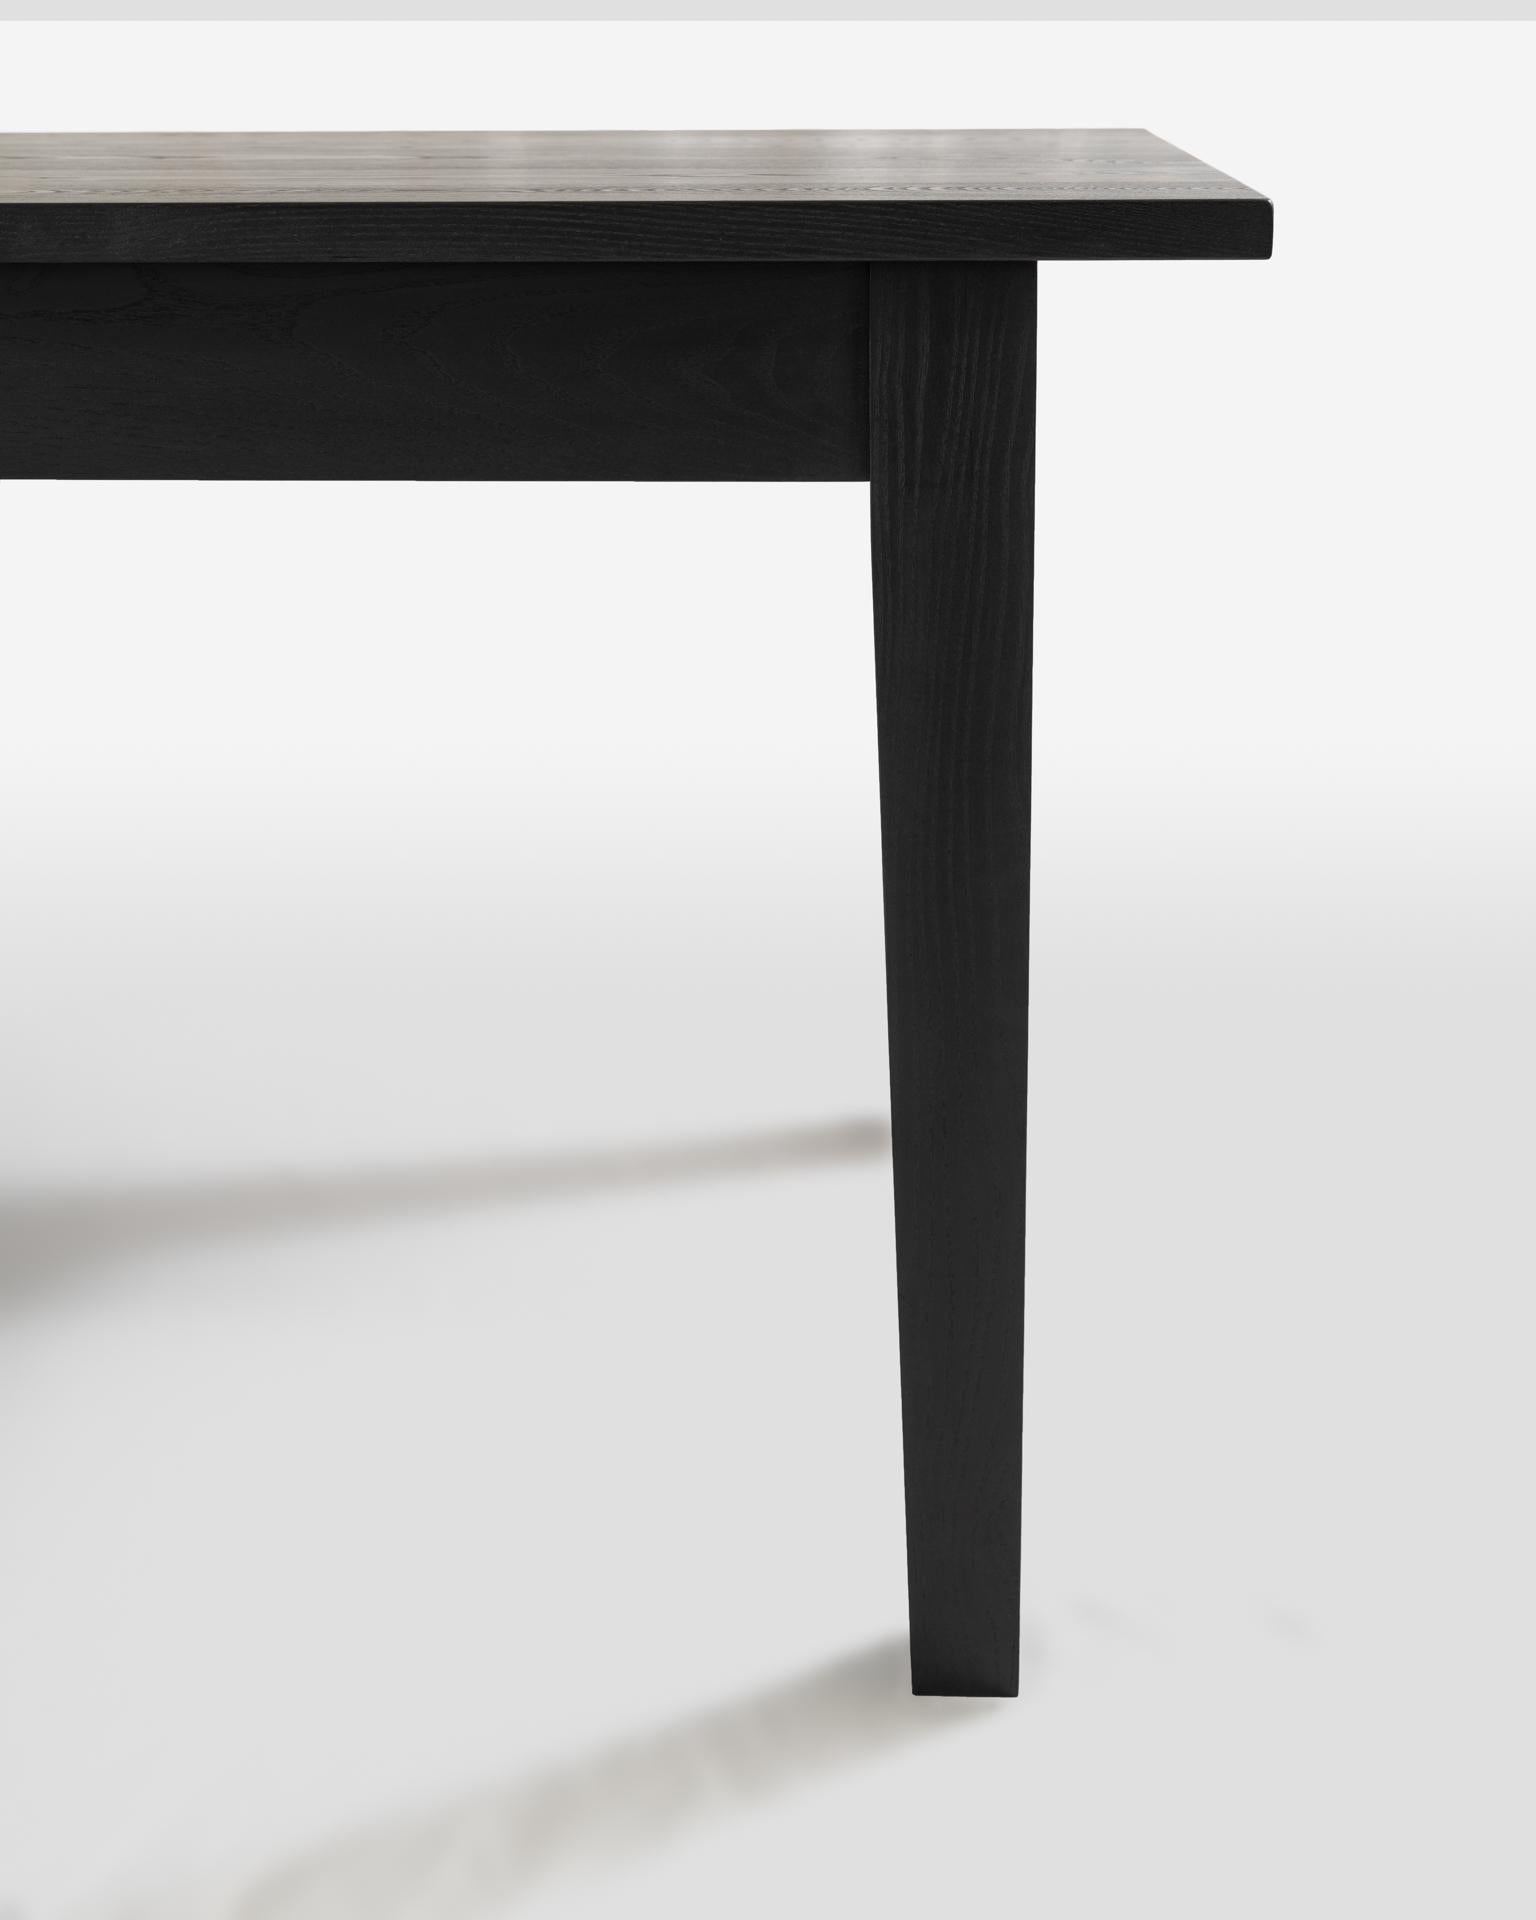 Contemporary New England Farm Table, Shaker Modern Dining Table in Blackened Ash For Sale